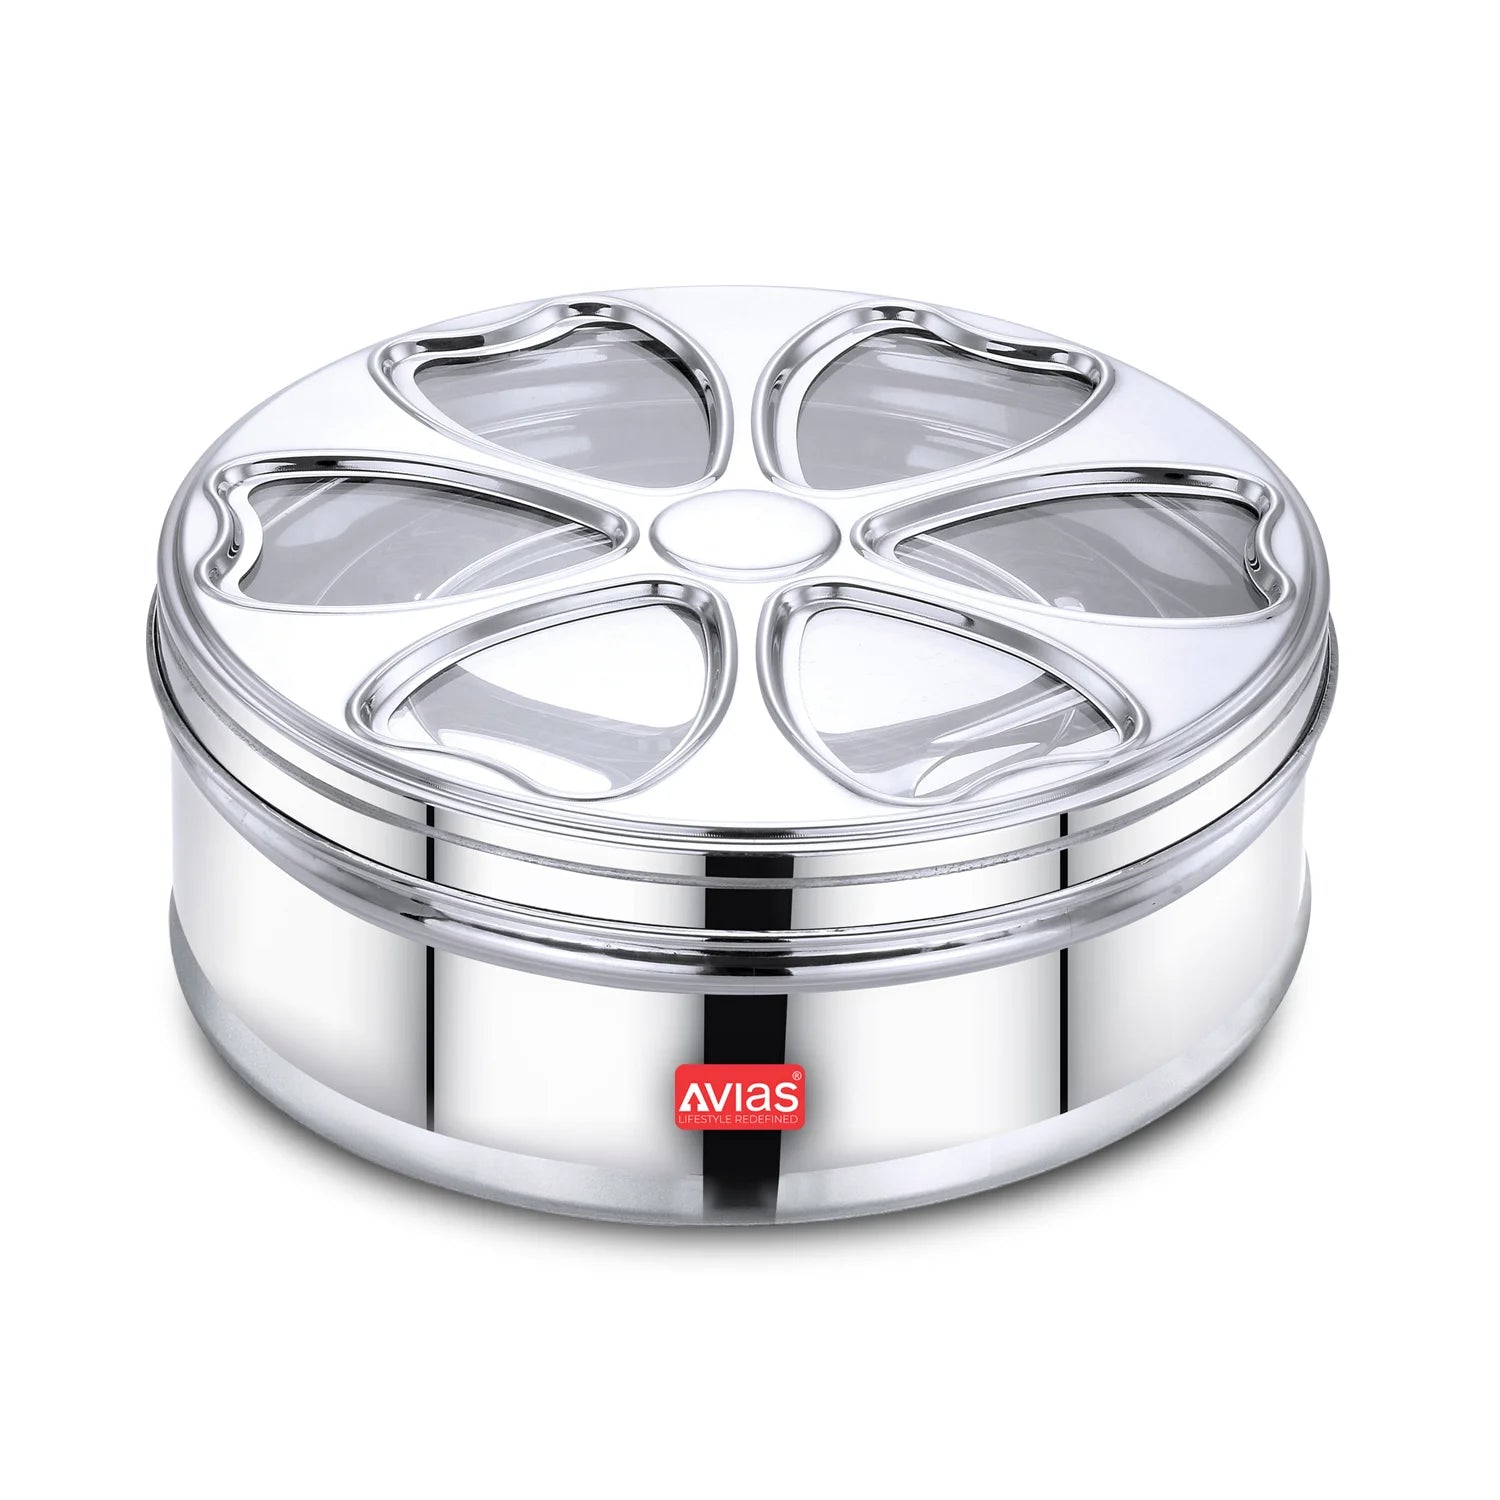 AVIAS stainless steel Petal spice box with see-through lid